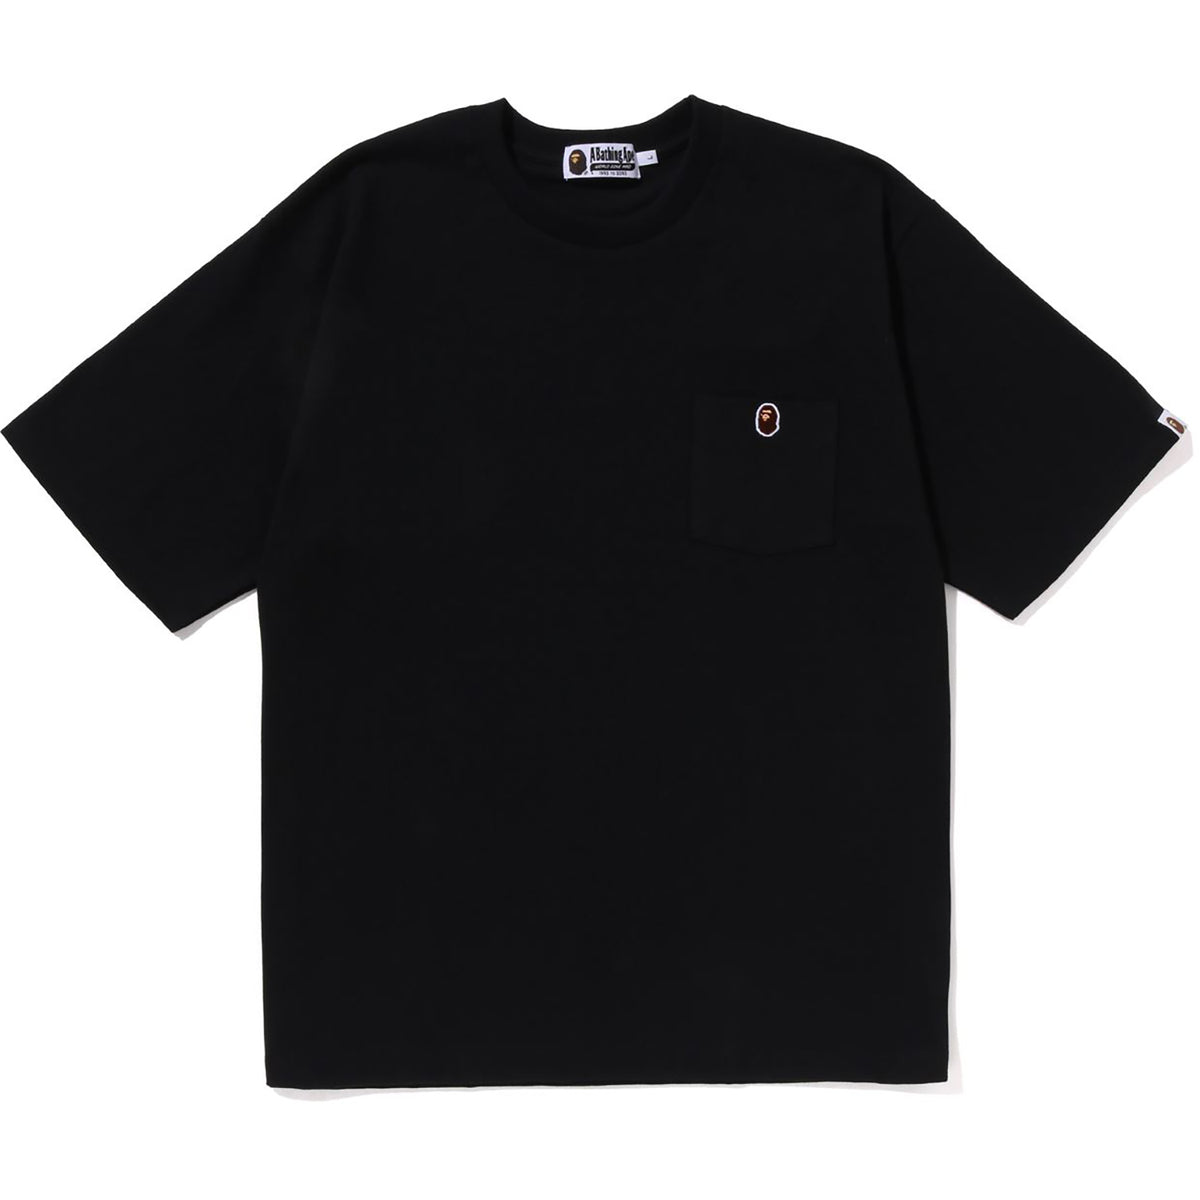 APE HEAD ONE POINT RELAXED FIT POCKET TEE MENS